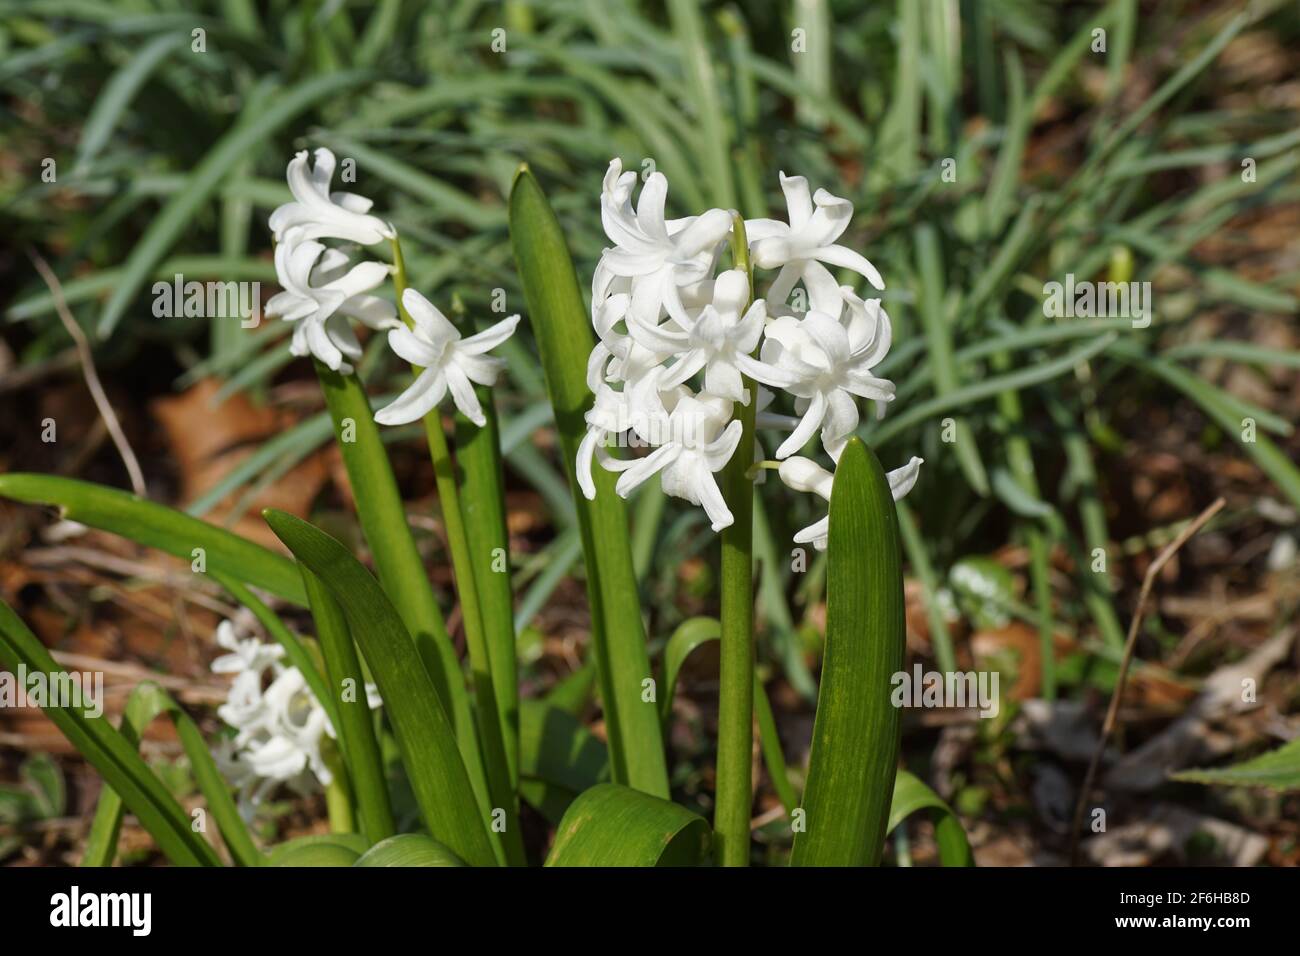 White Common Hyacinth, Garden Hyacinth (Hyacinthus orientalis), Subfamily Scilloideae, Family Asparagaceae. In the garden with faded withered leaves Stock Photo